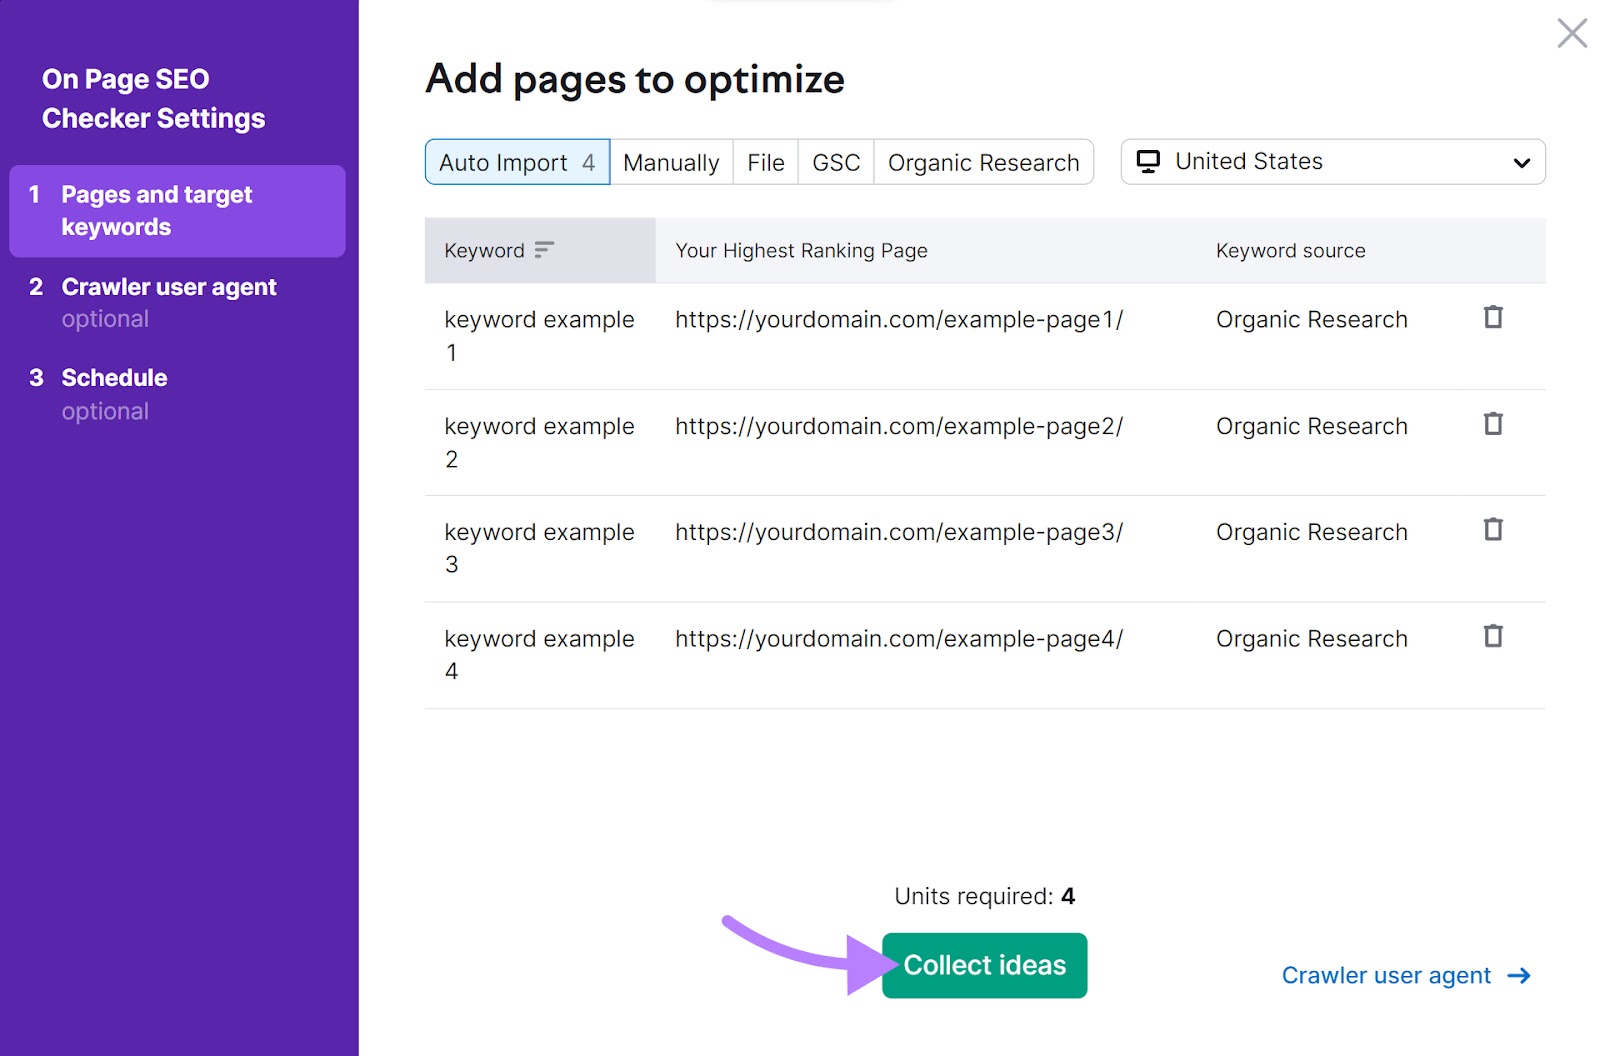 "Add pages to optimize" screen in On-Page SEO Checker settings